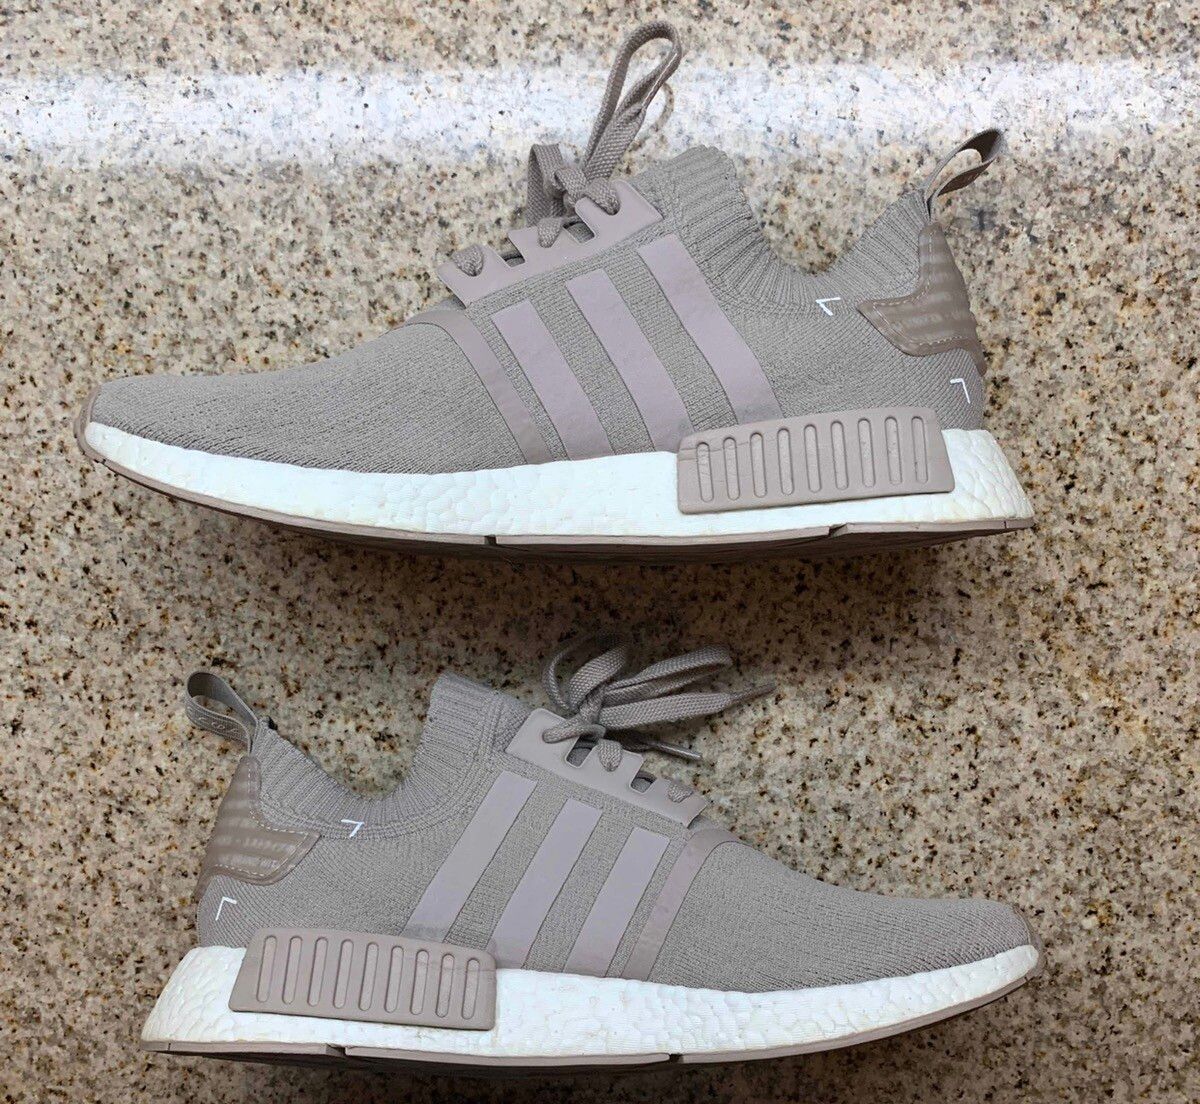 Adidas NMD_R1 PK French Beige Size US 11.5 / EU 44-45 - 2 Preview